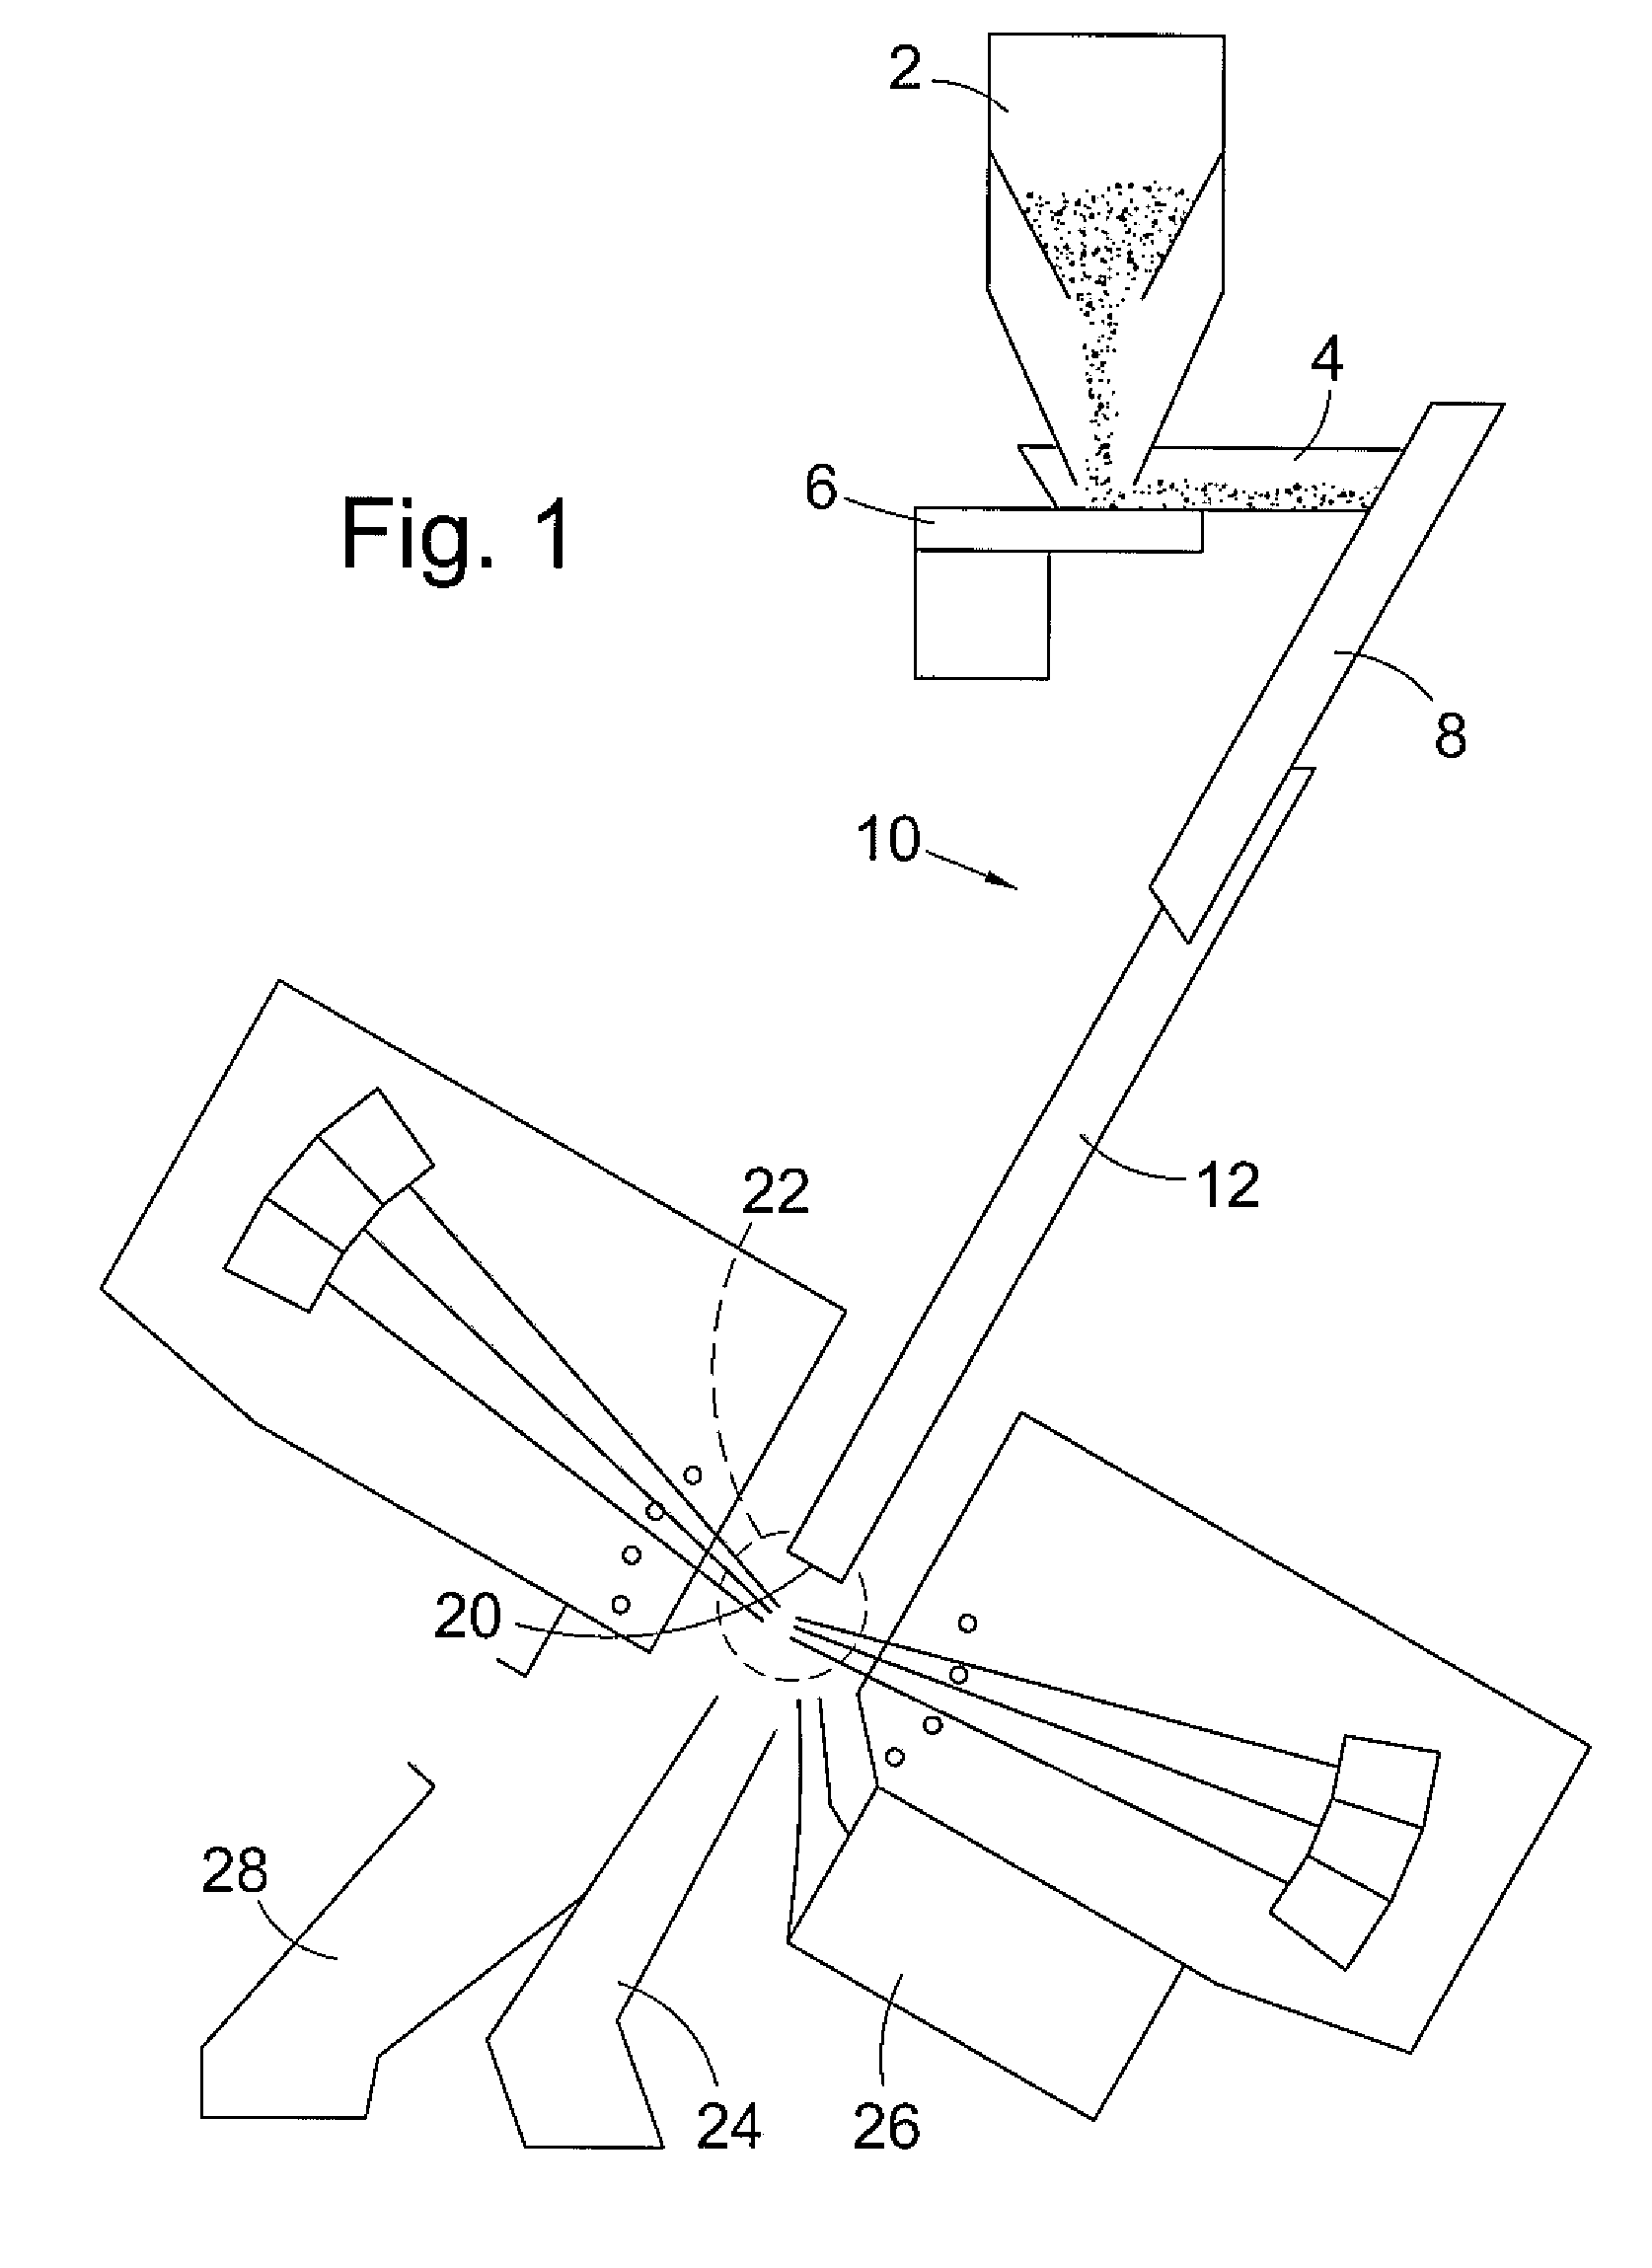 Chutes for sorting and inspection apparatus